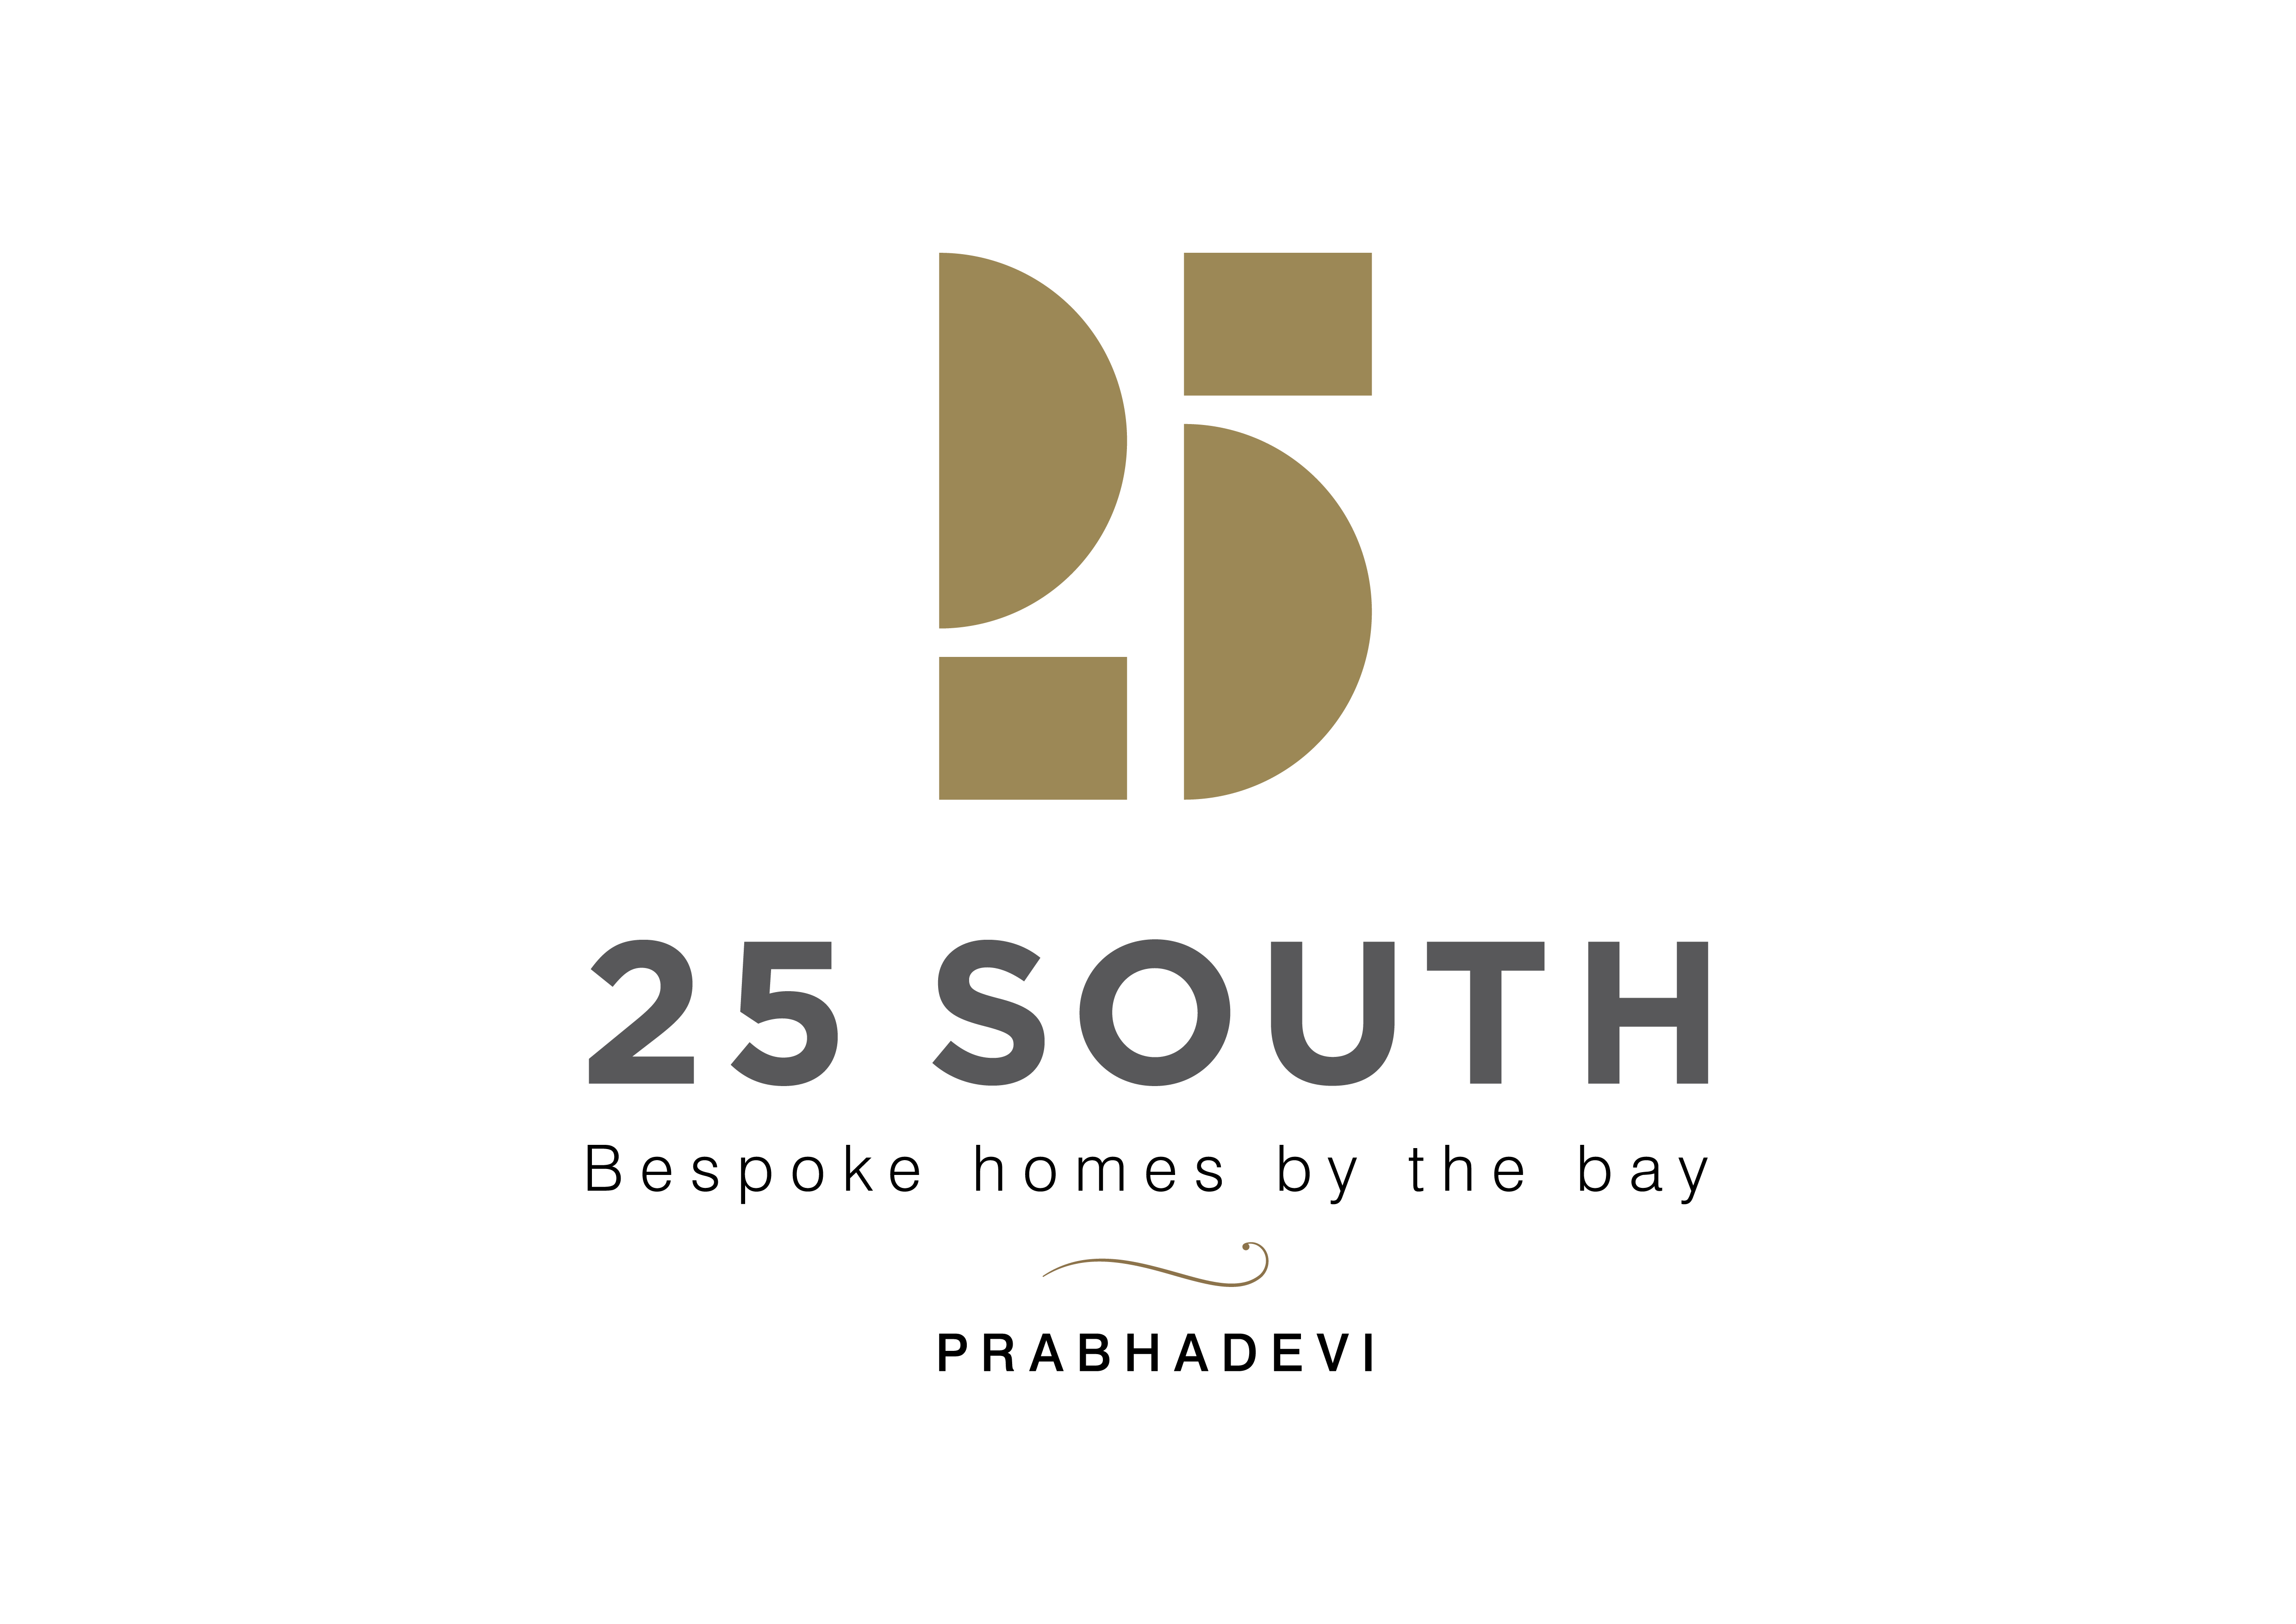 25 South bespoke homes by the bay Prabhadevi footer logo